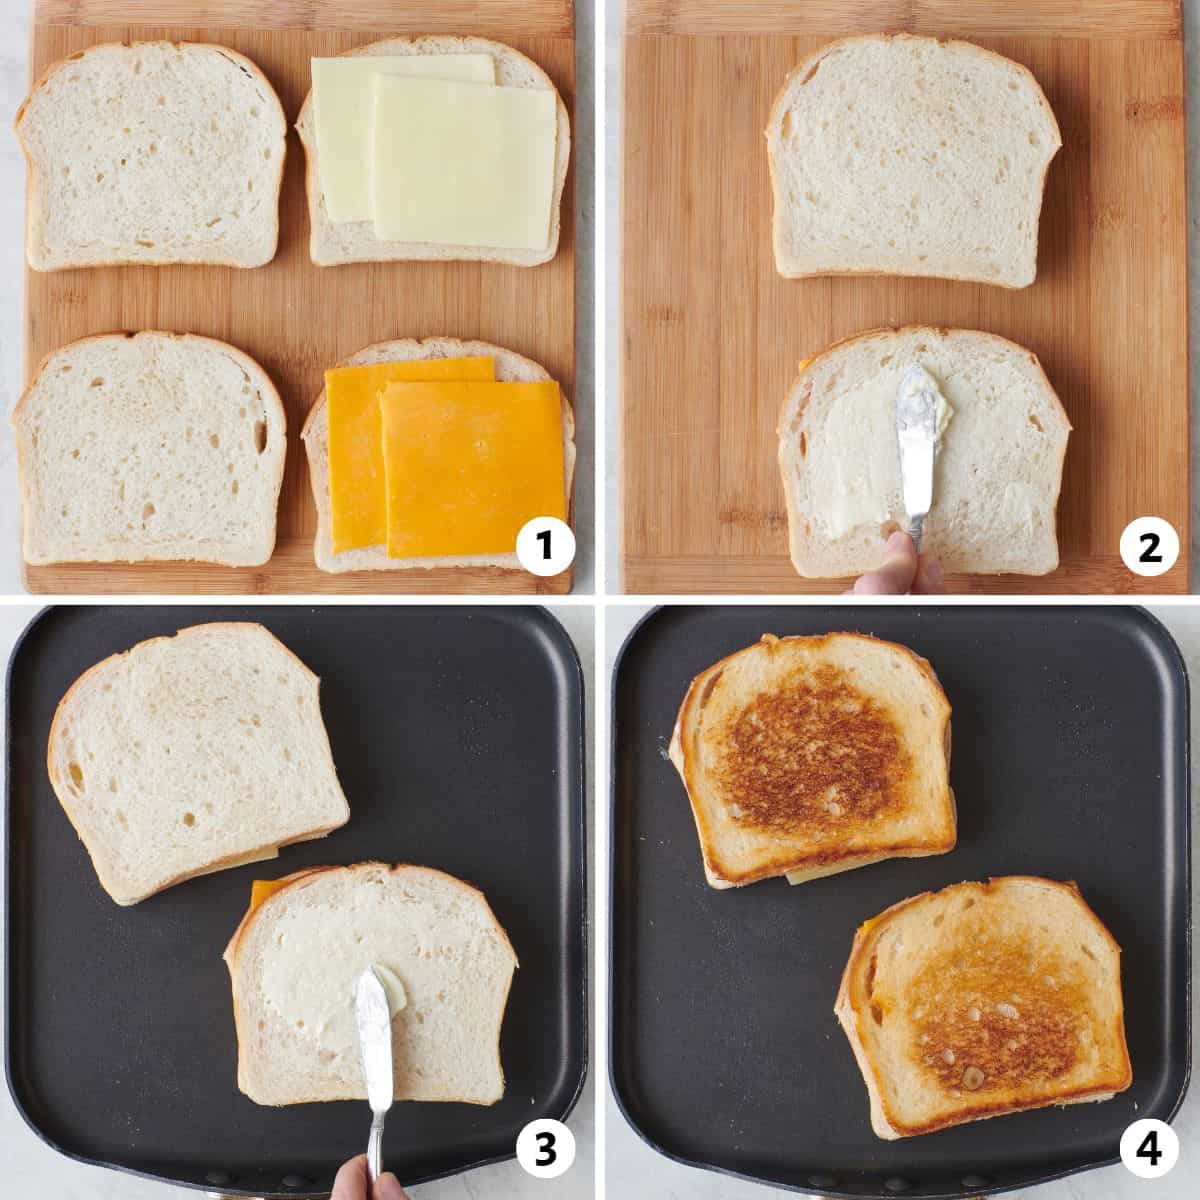 4 image collage making recipe: 1- add sliced cheese to bread slices, 2- sandwiches closed with a knife adding butter to one side, 3- sandwiches, buttered side down, on a griddle with a knife adding butter to the other side, 4- sandwiches after grilling.